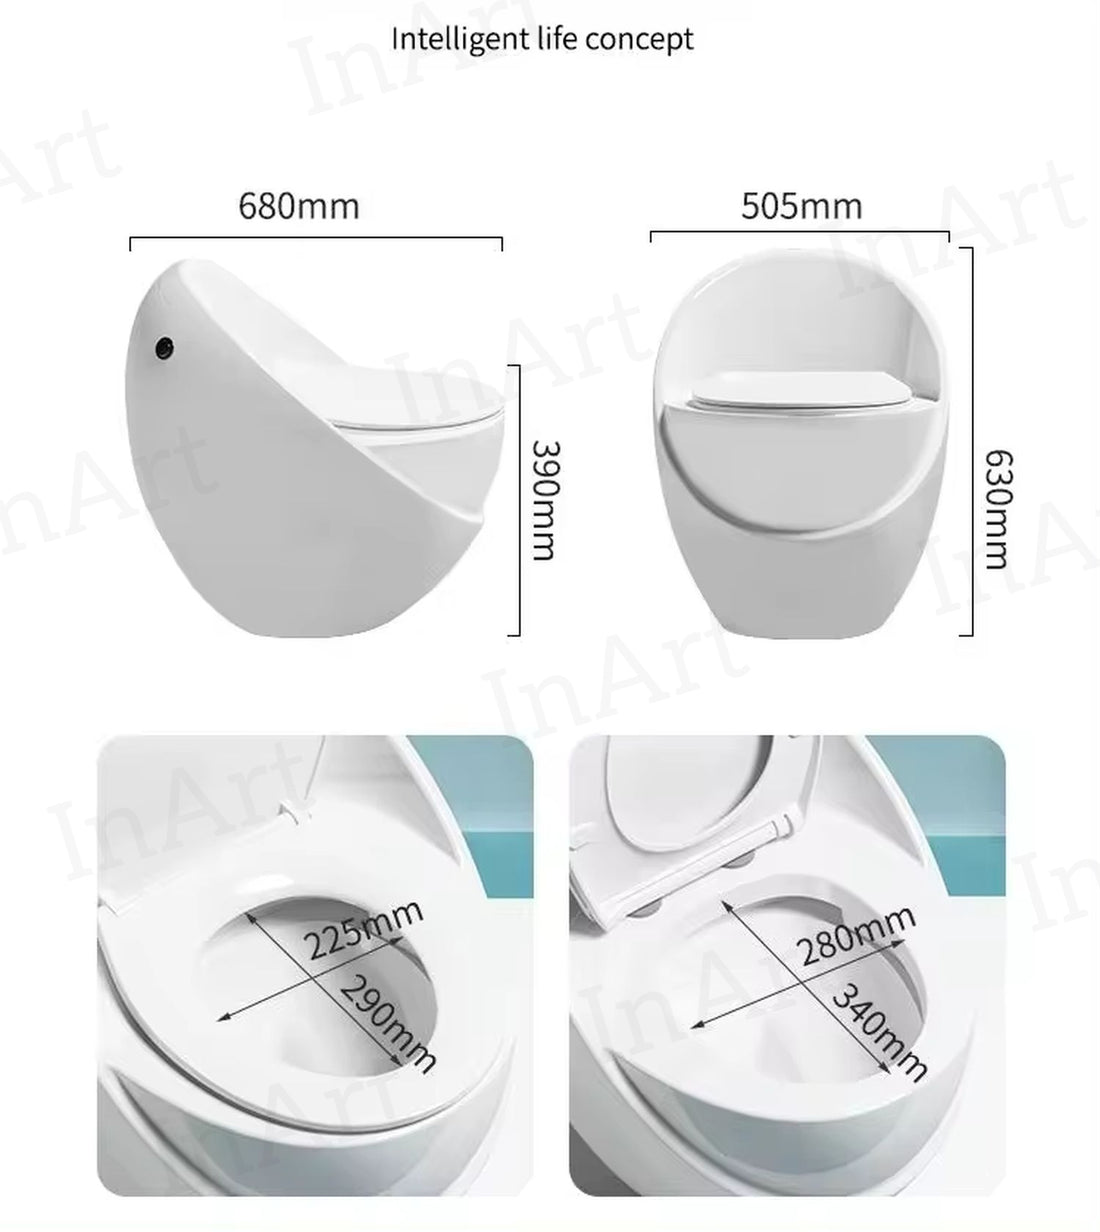 InArt Siphon Jet Egg-Shaped Modern One-Piece Toilet, Ceramic with Soft Close Seat, Glossy White - 67x50.5x63 cm - InArt-Studio